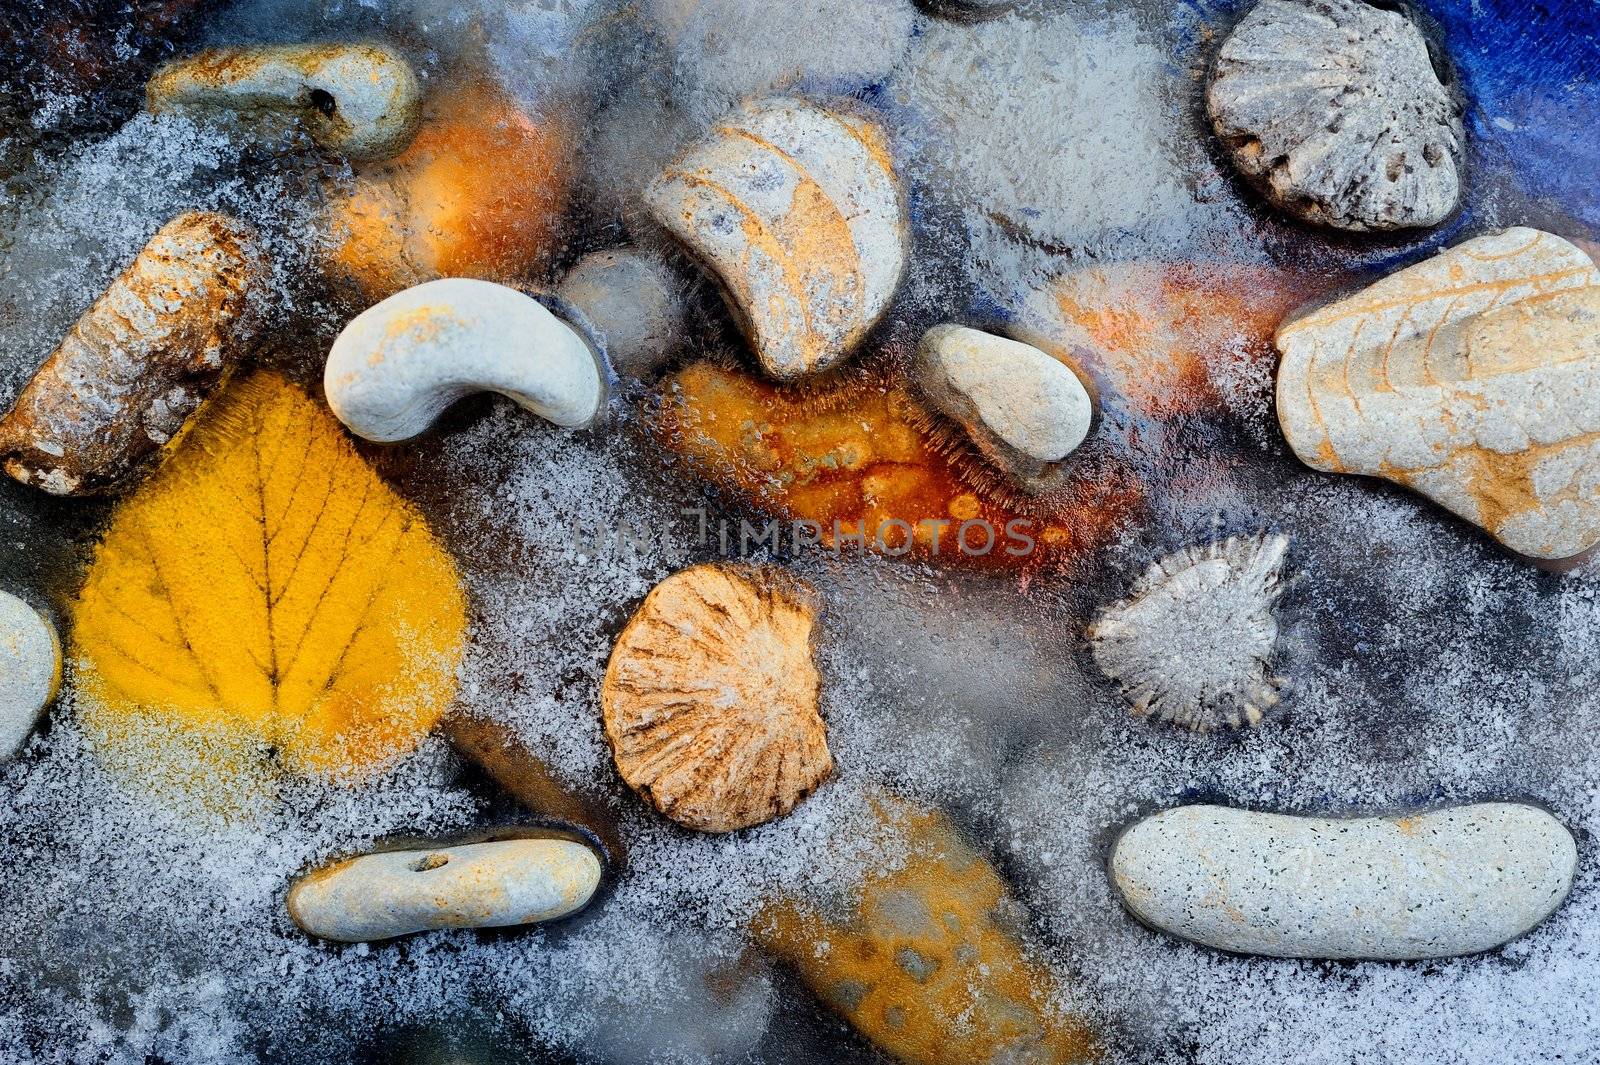 The sea pebble and yellow leaf have frozen on a beach